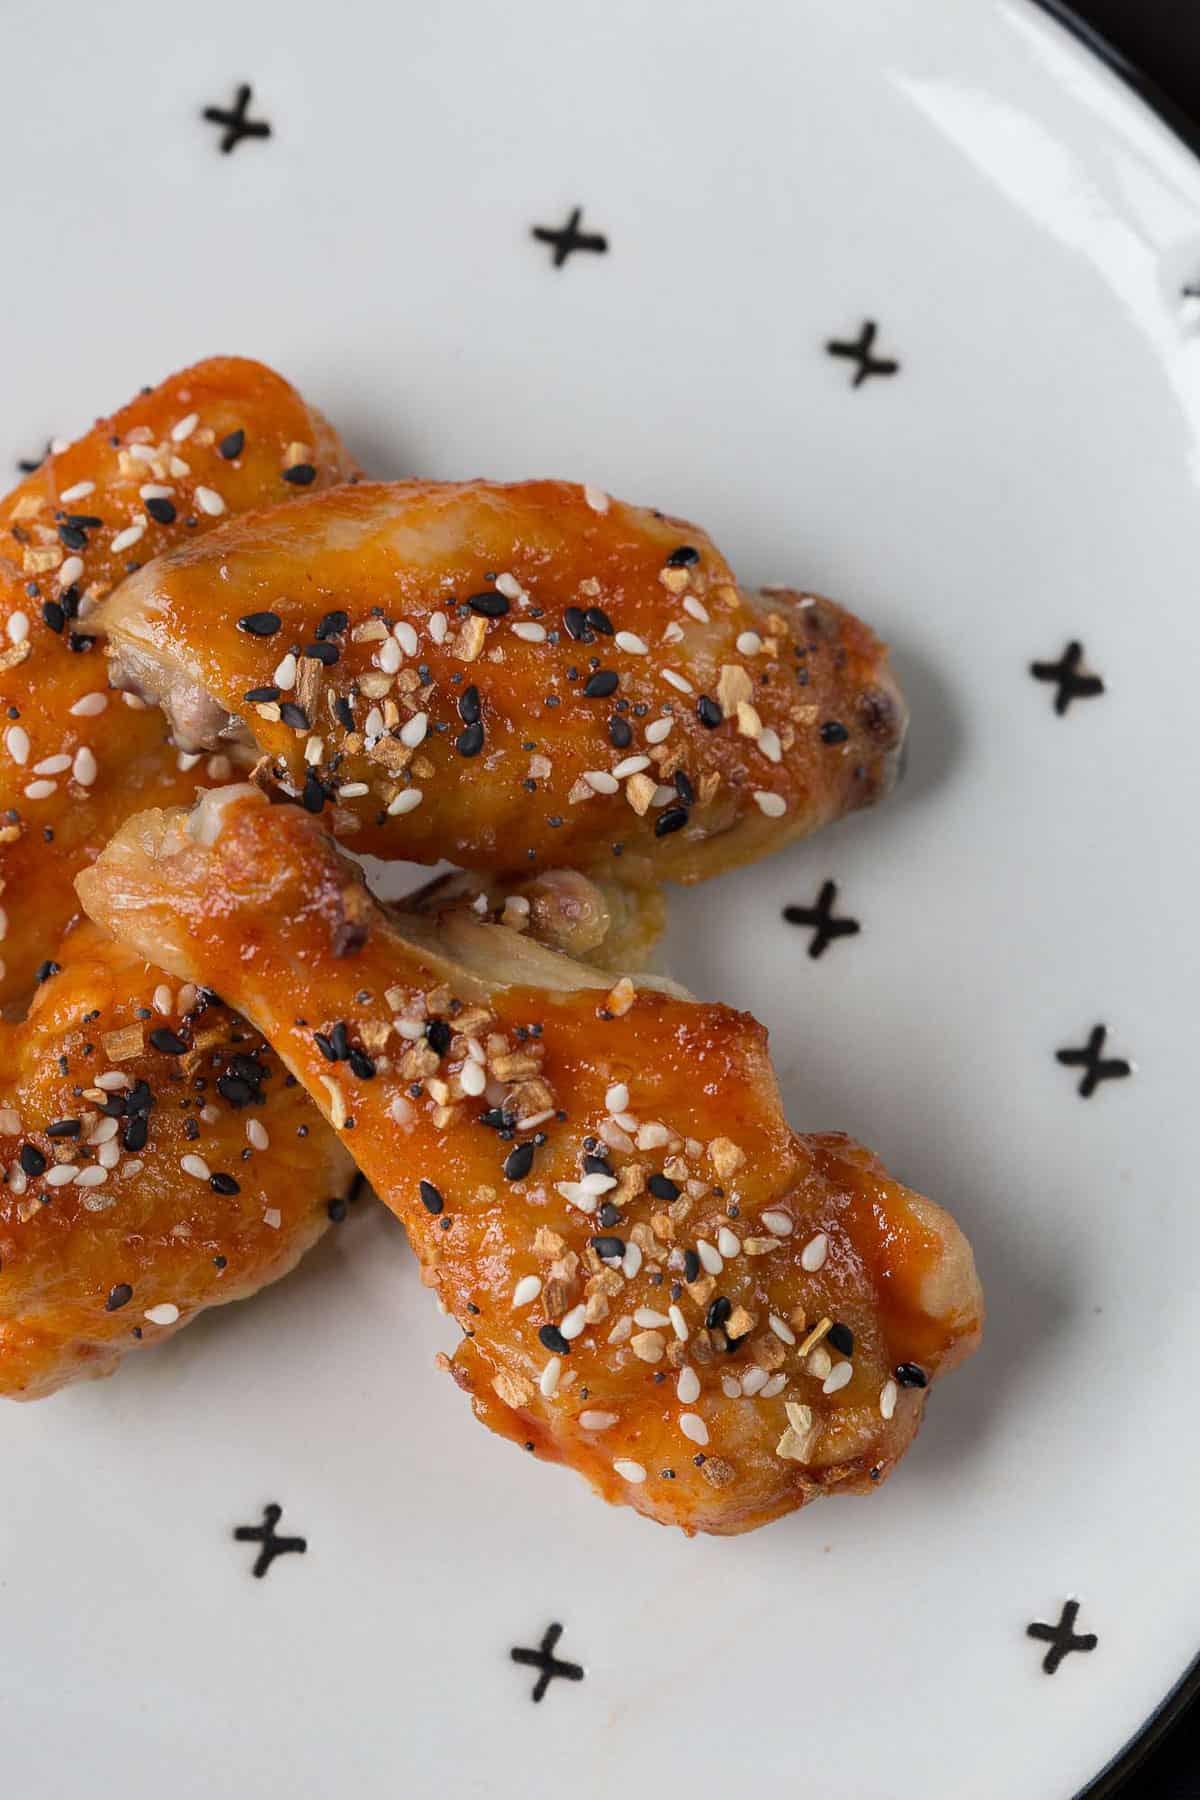 https://www.giftofhospitality.com/wp-content/uploads/2018/01/sweet-and-spicy-baked-wings.jpg